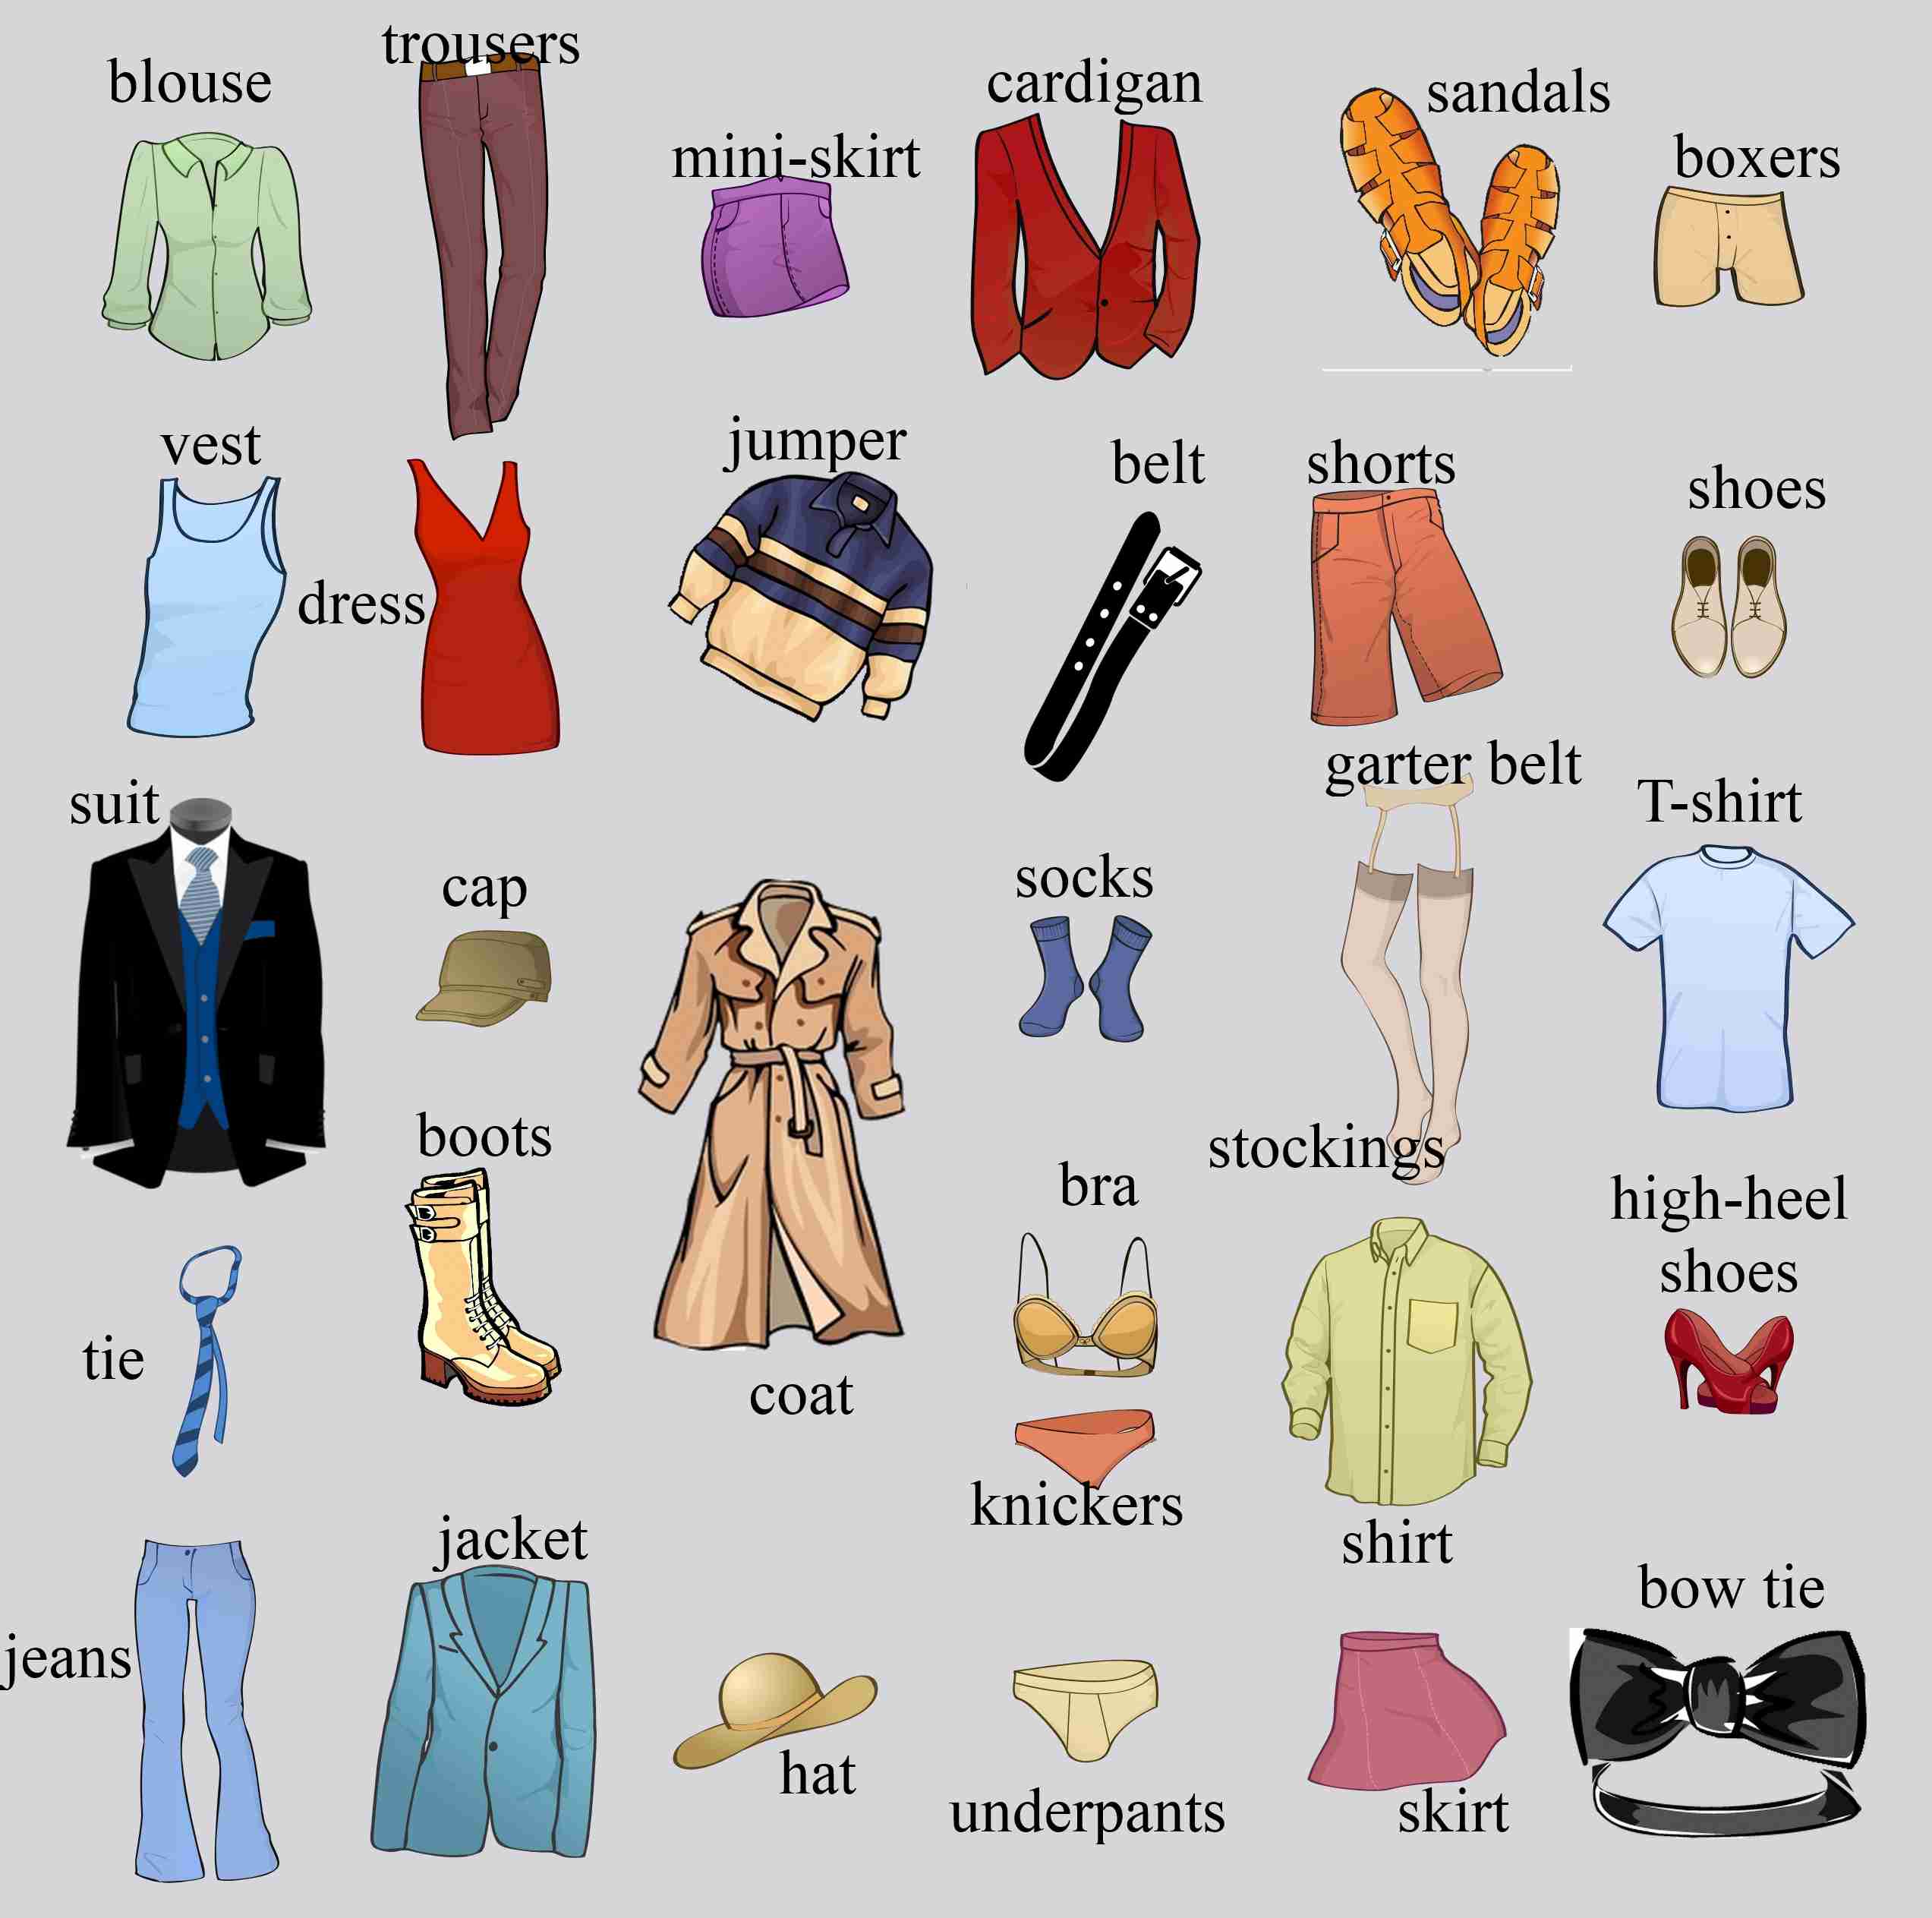 clothes-vocabulary-games-to-learn-english-games-to-learn-english